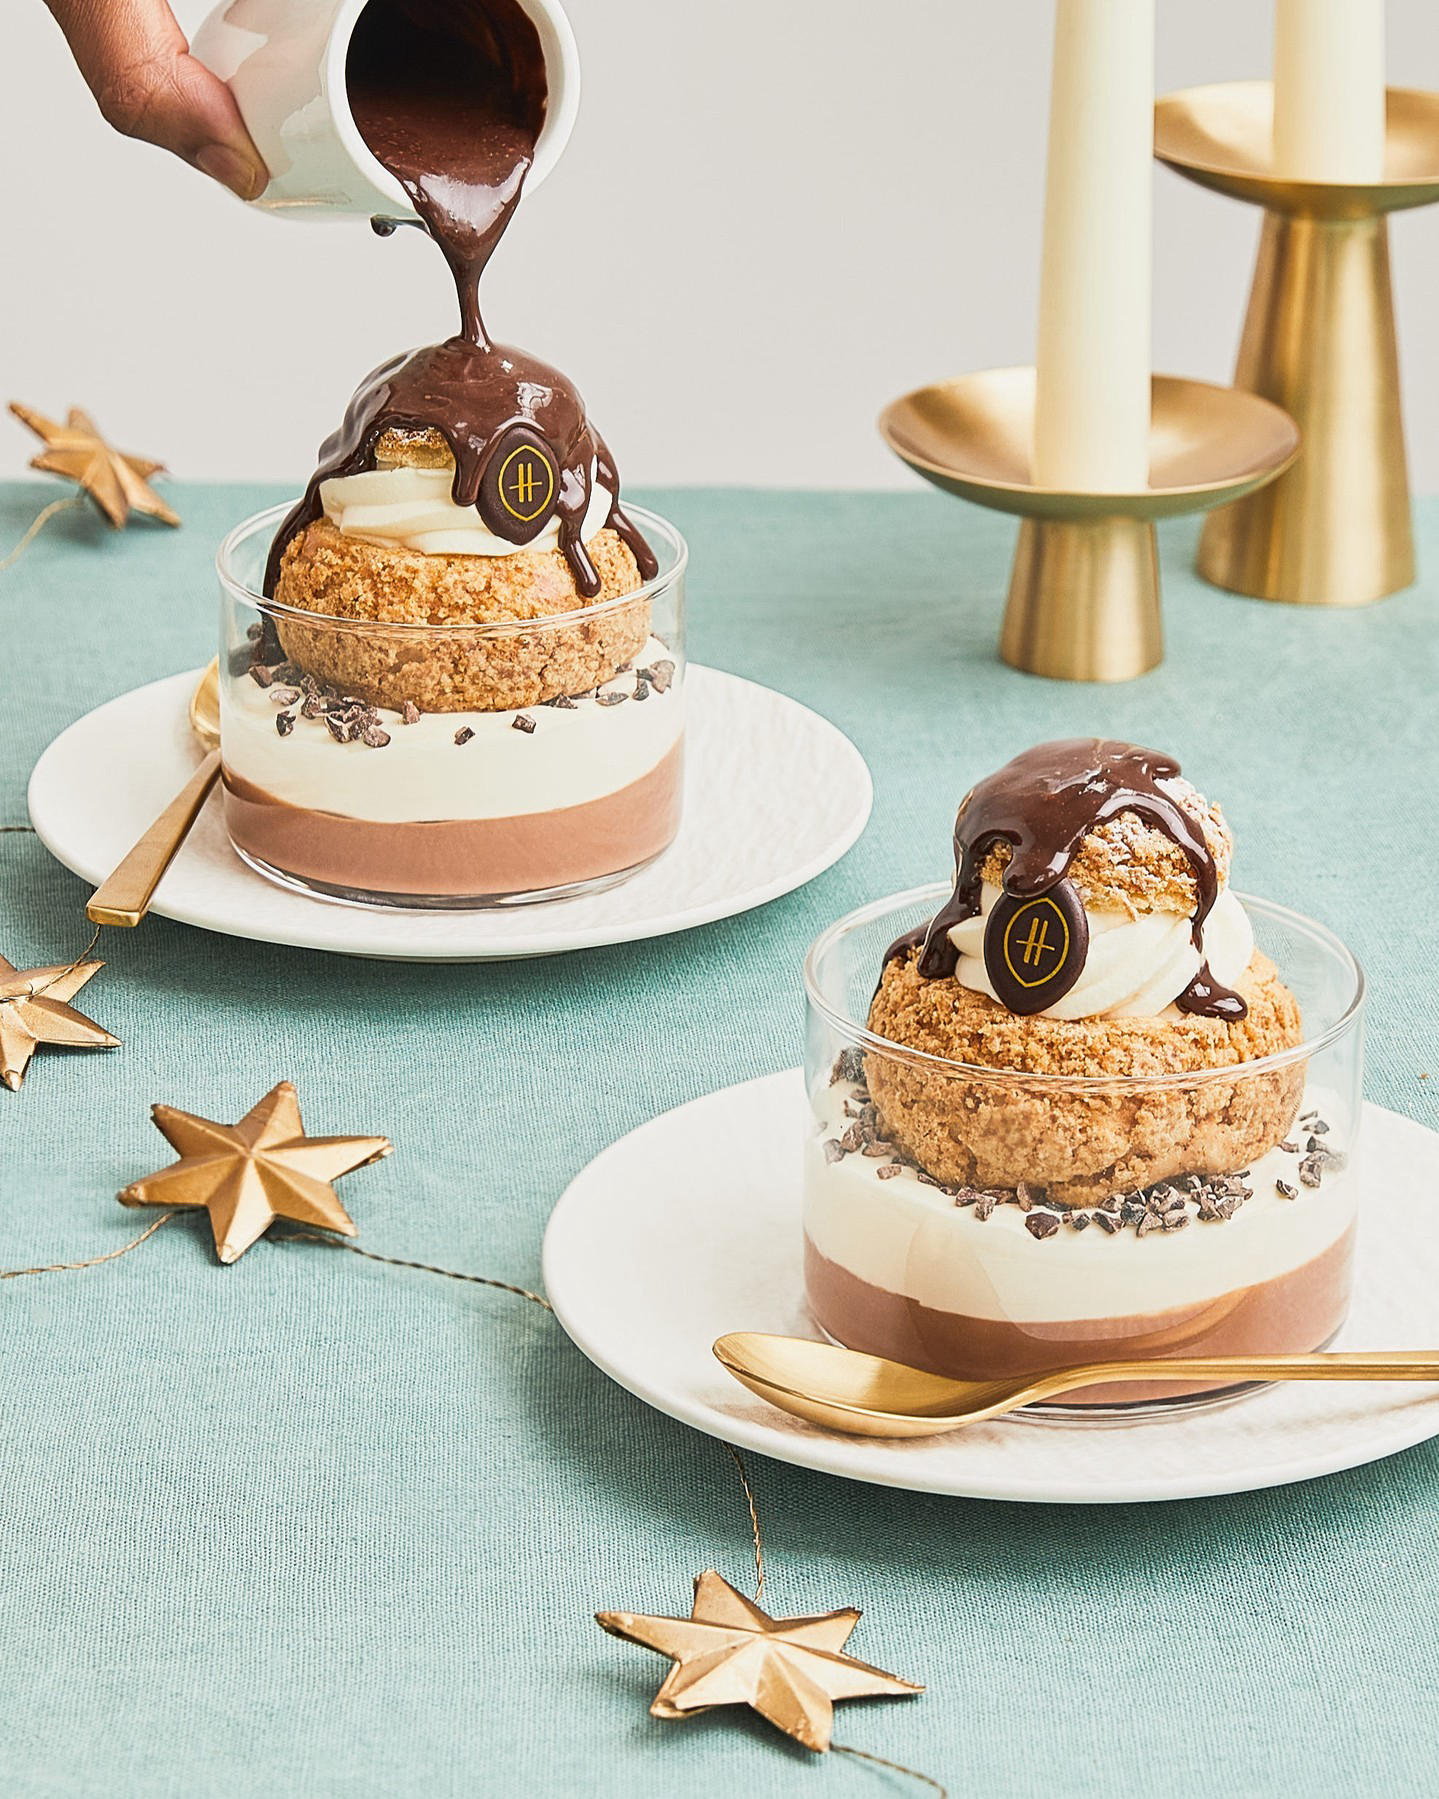 Harrods Food - Baba sponge trifle with sherry syrup and raspberry compote or chocolate profiteroles